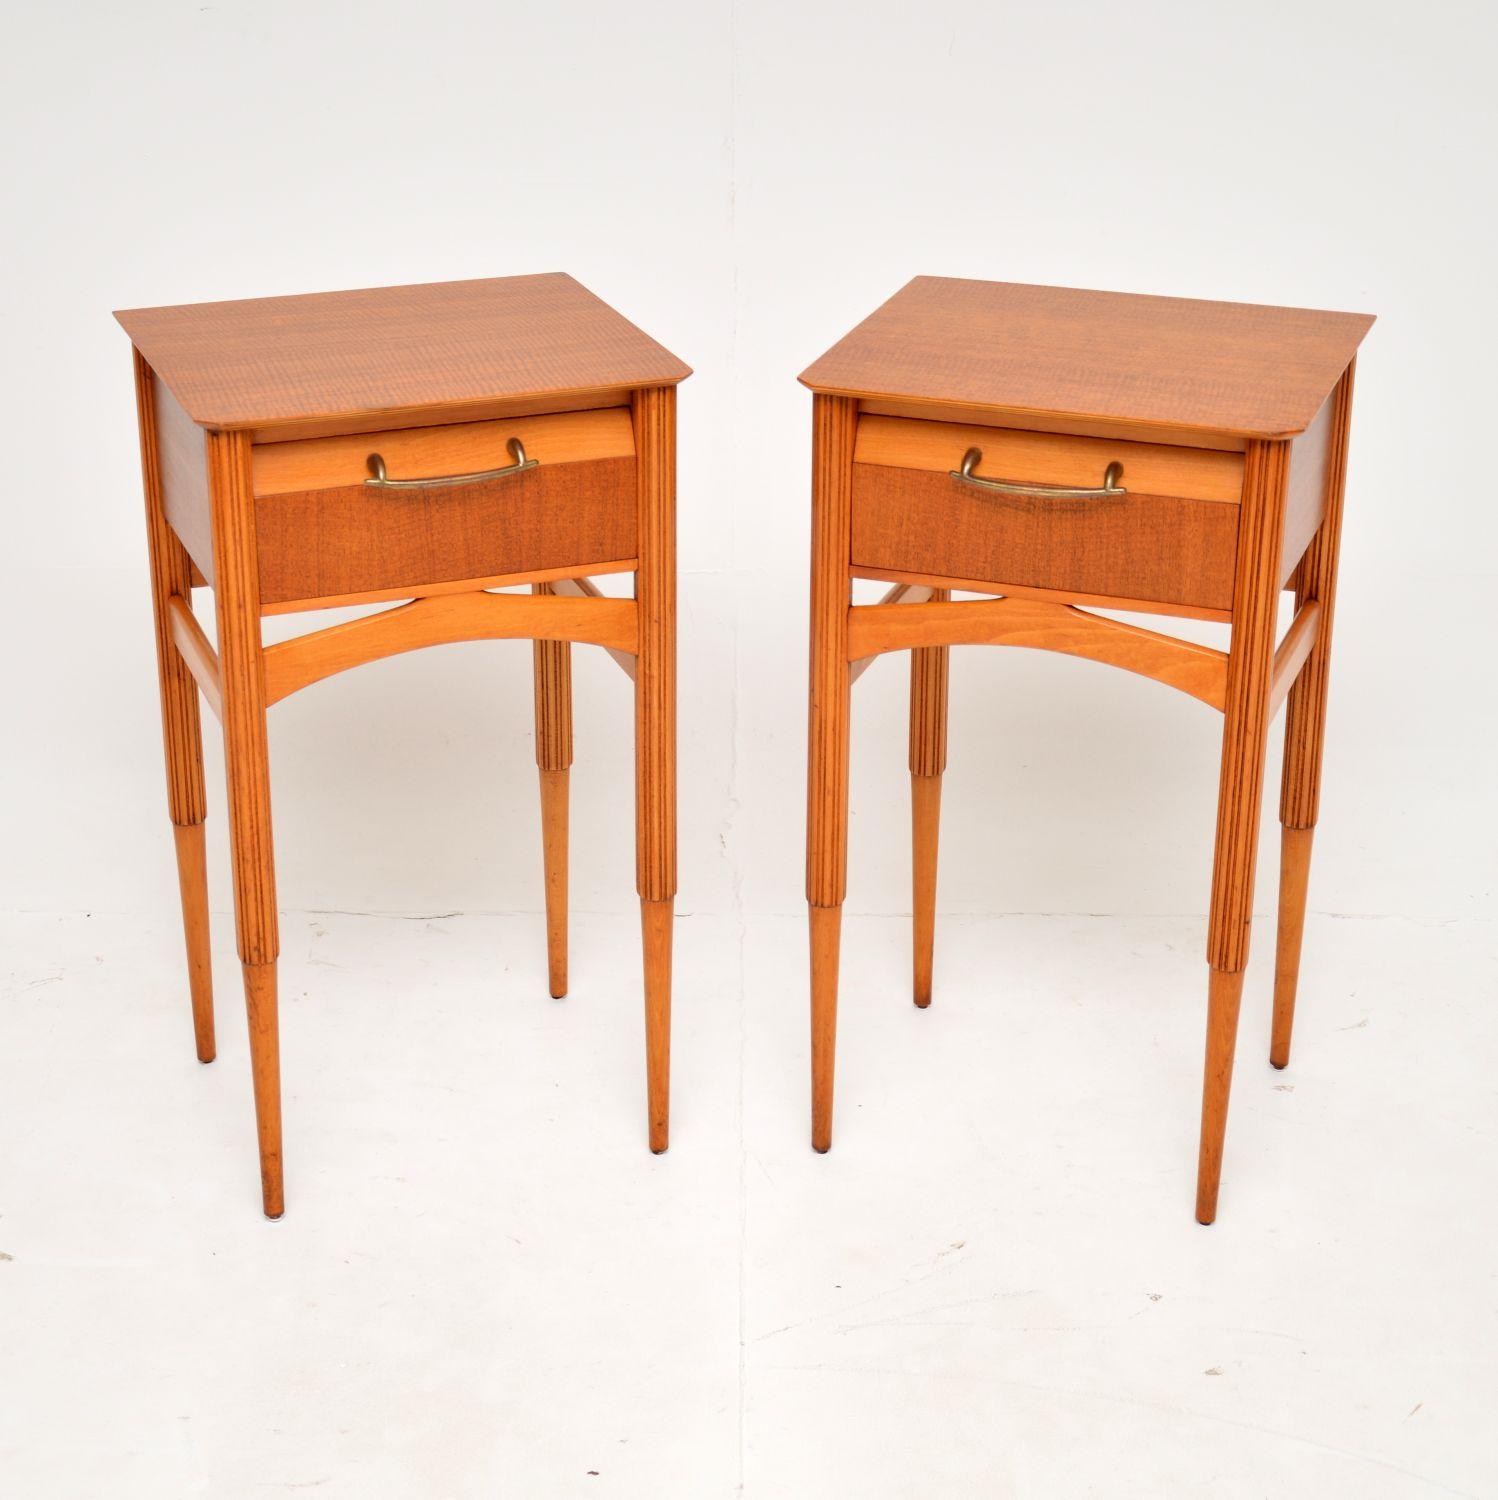 A stunning pair of original vintage side tables in satin wood. They were made in England, and date from the 1950-60’s.

The quality is amazing, these are beautifully styled and are a very useful size. They would be perfect for use as bedside